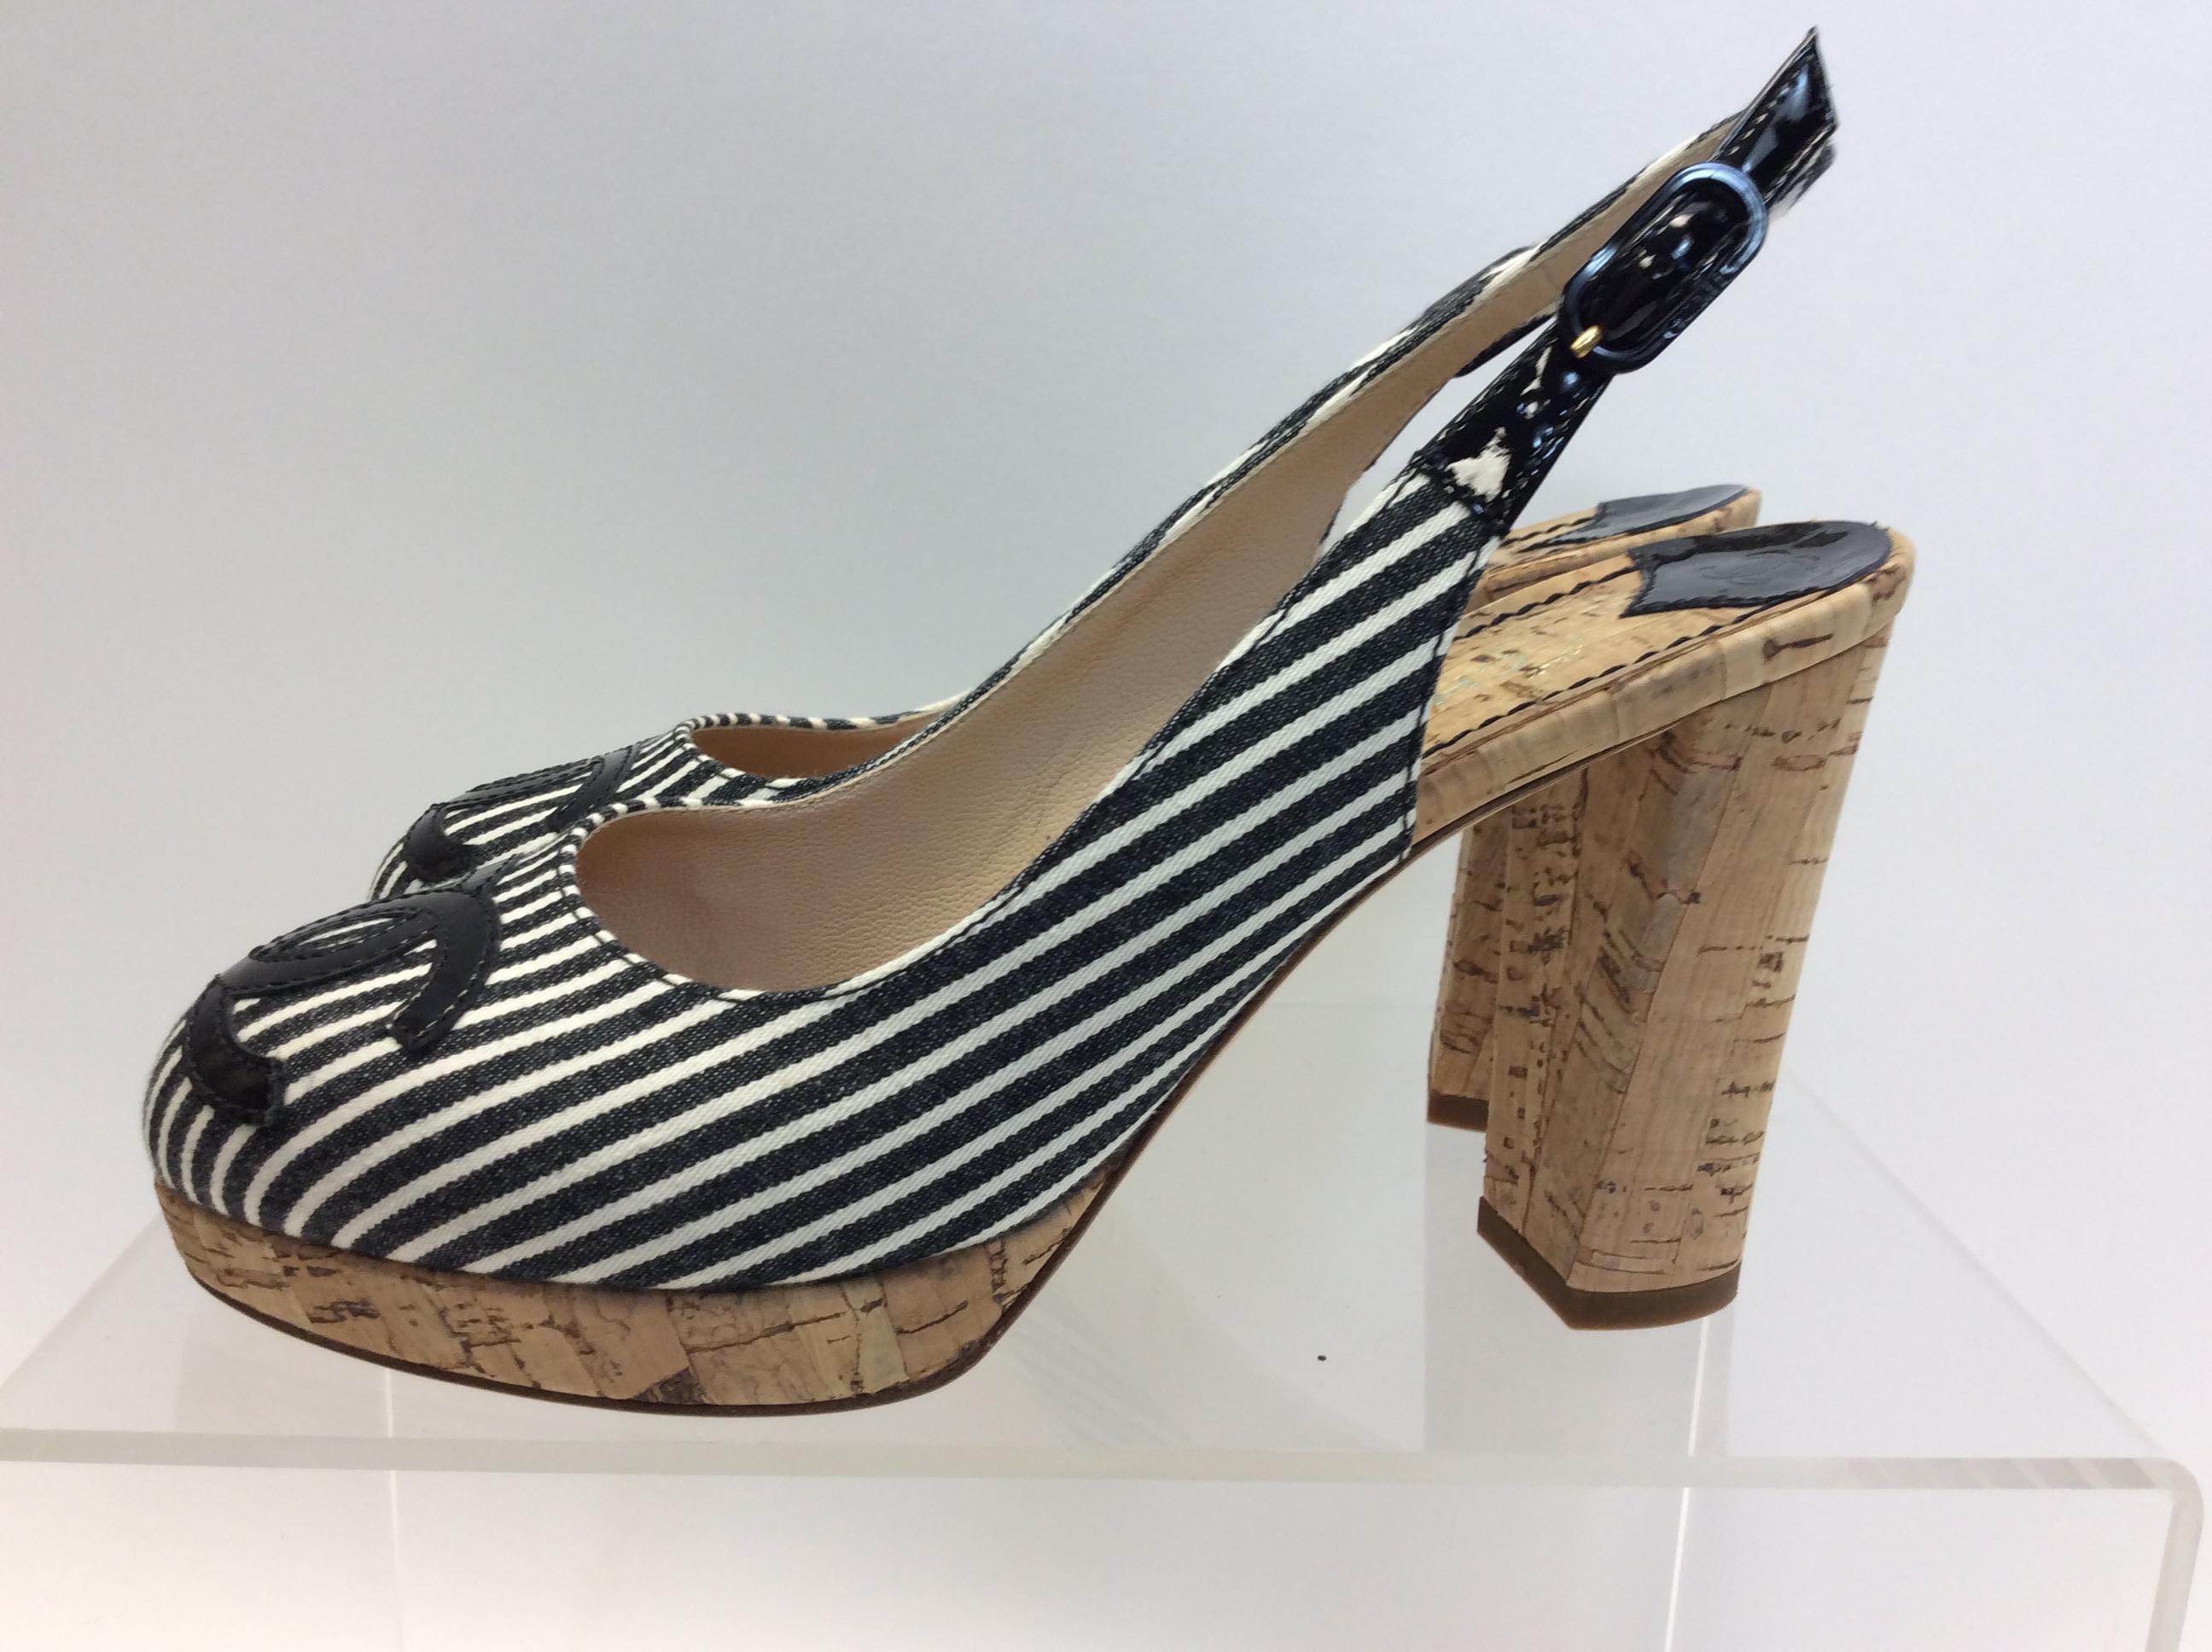 Chanel White and Black Stripe Slingback Heel
Made in Italy
Size 36
.5” platform
3.75” heel